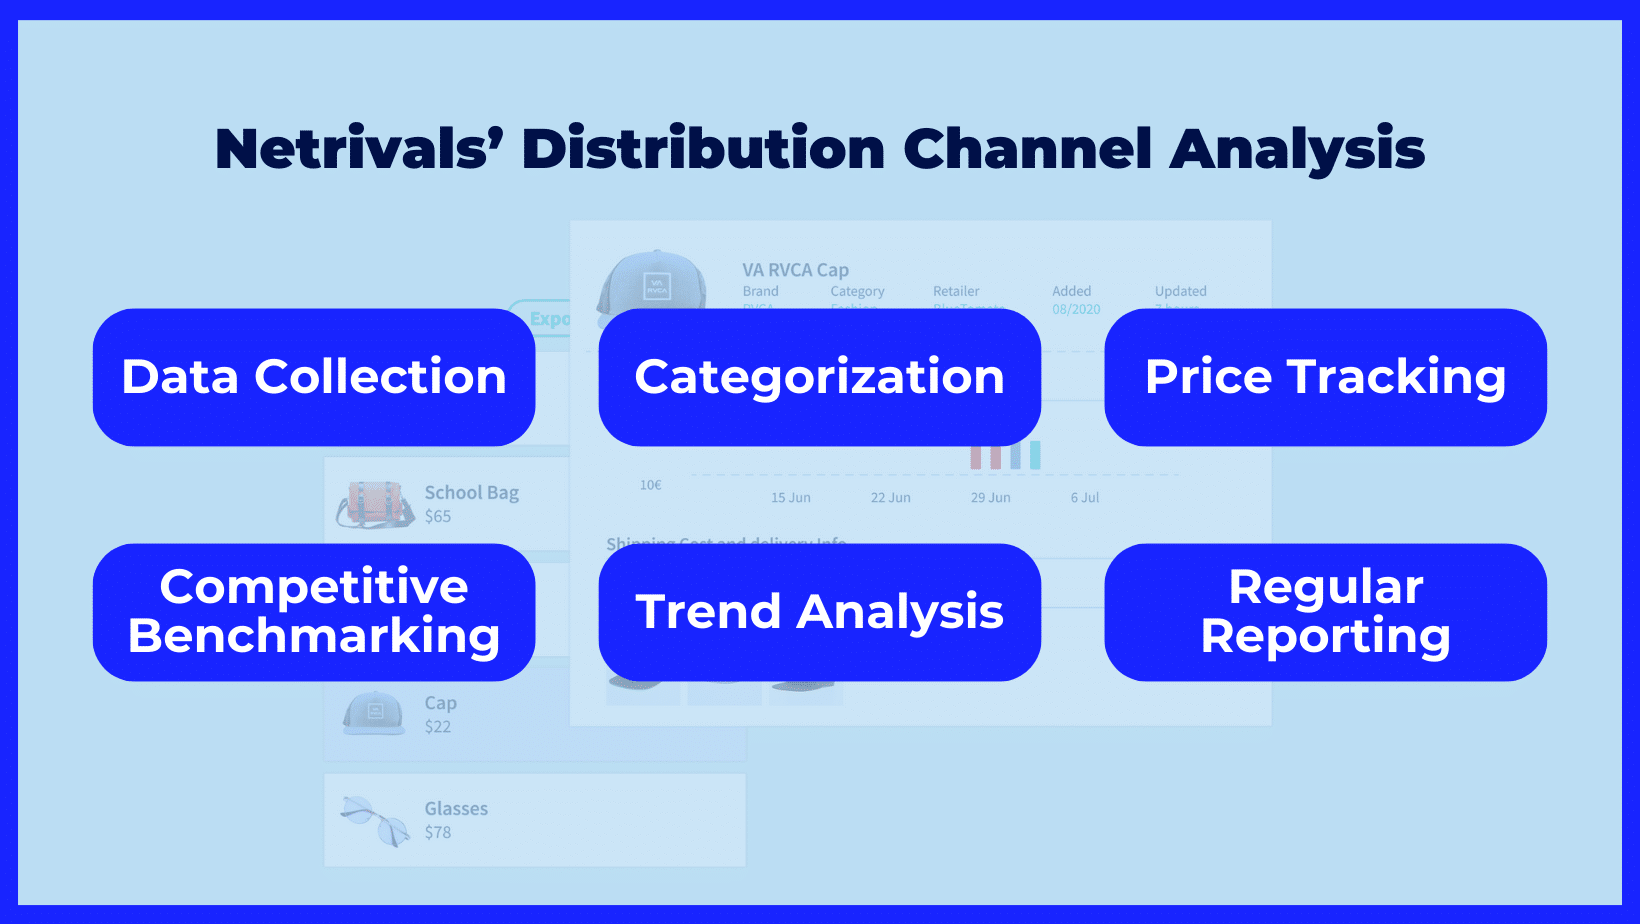 Netrivals' Distribution Channel Analysis